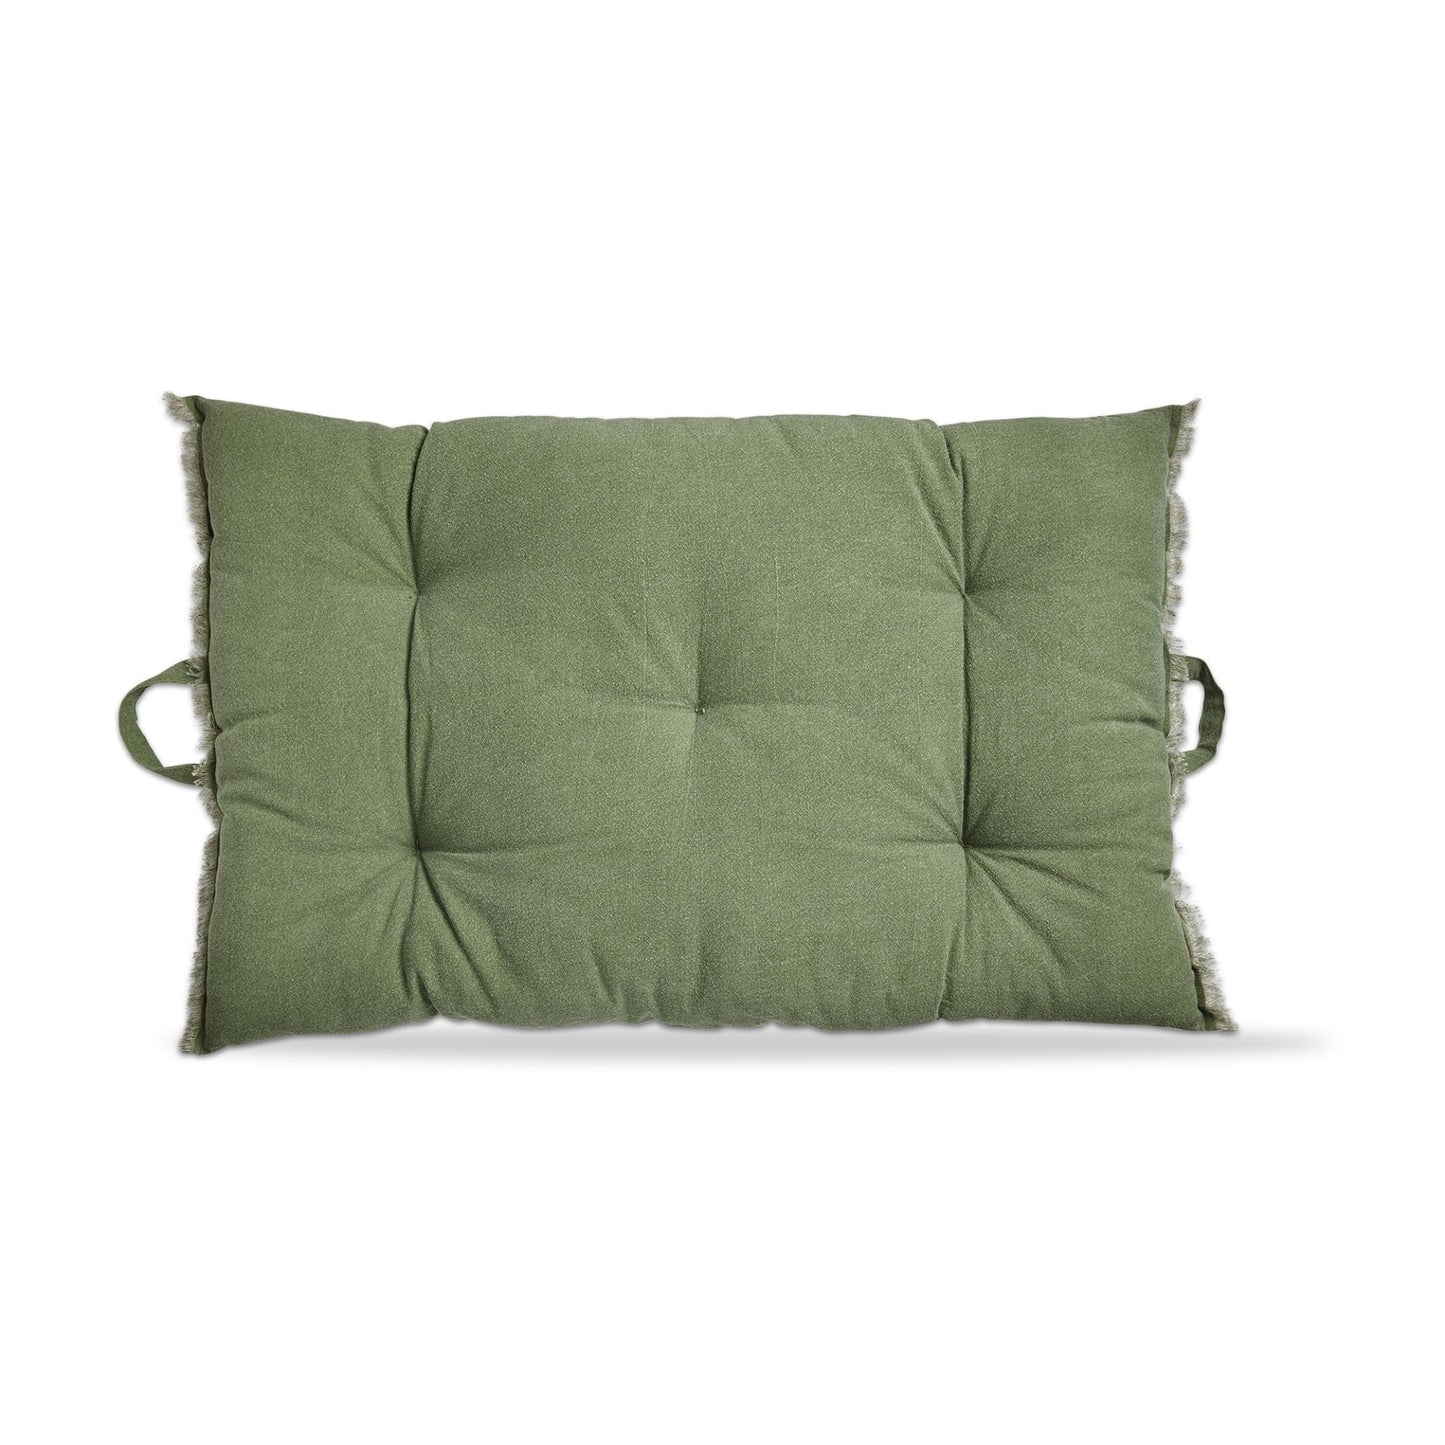 Throw Floor Pillows with Handles